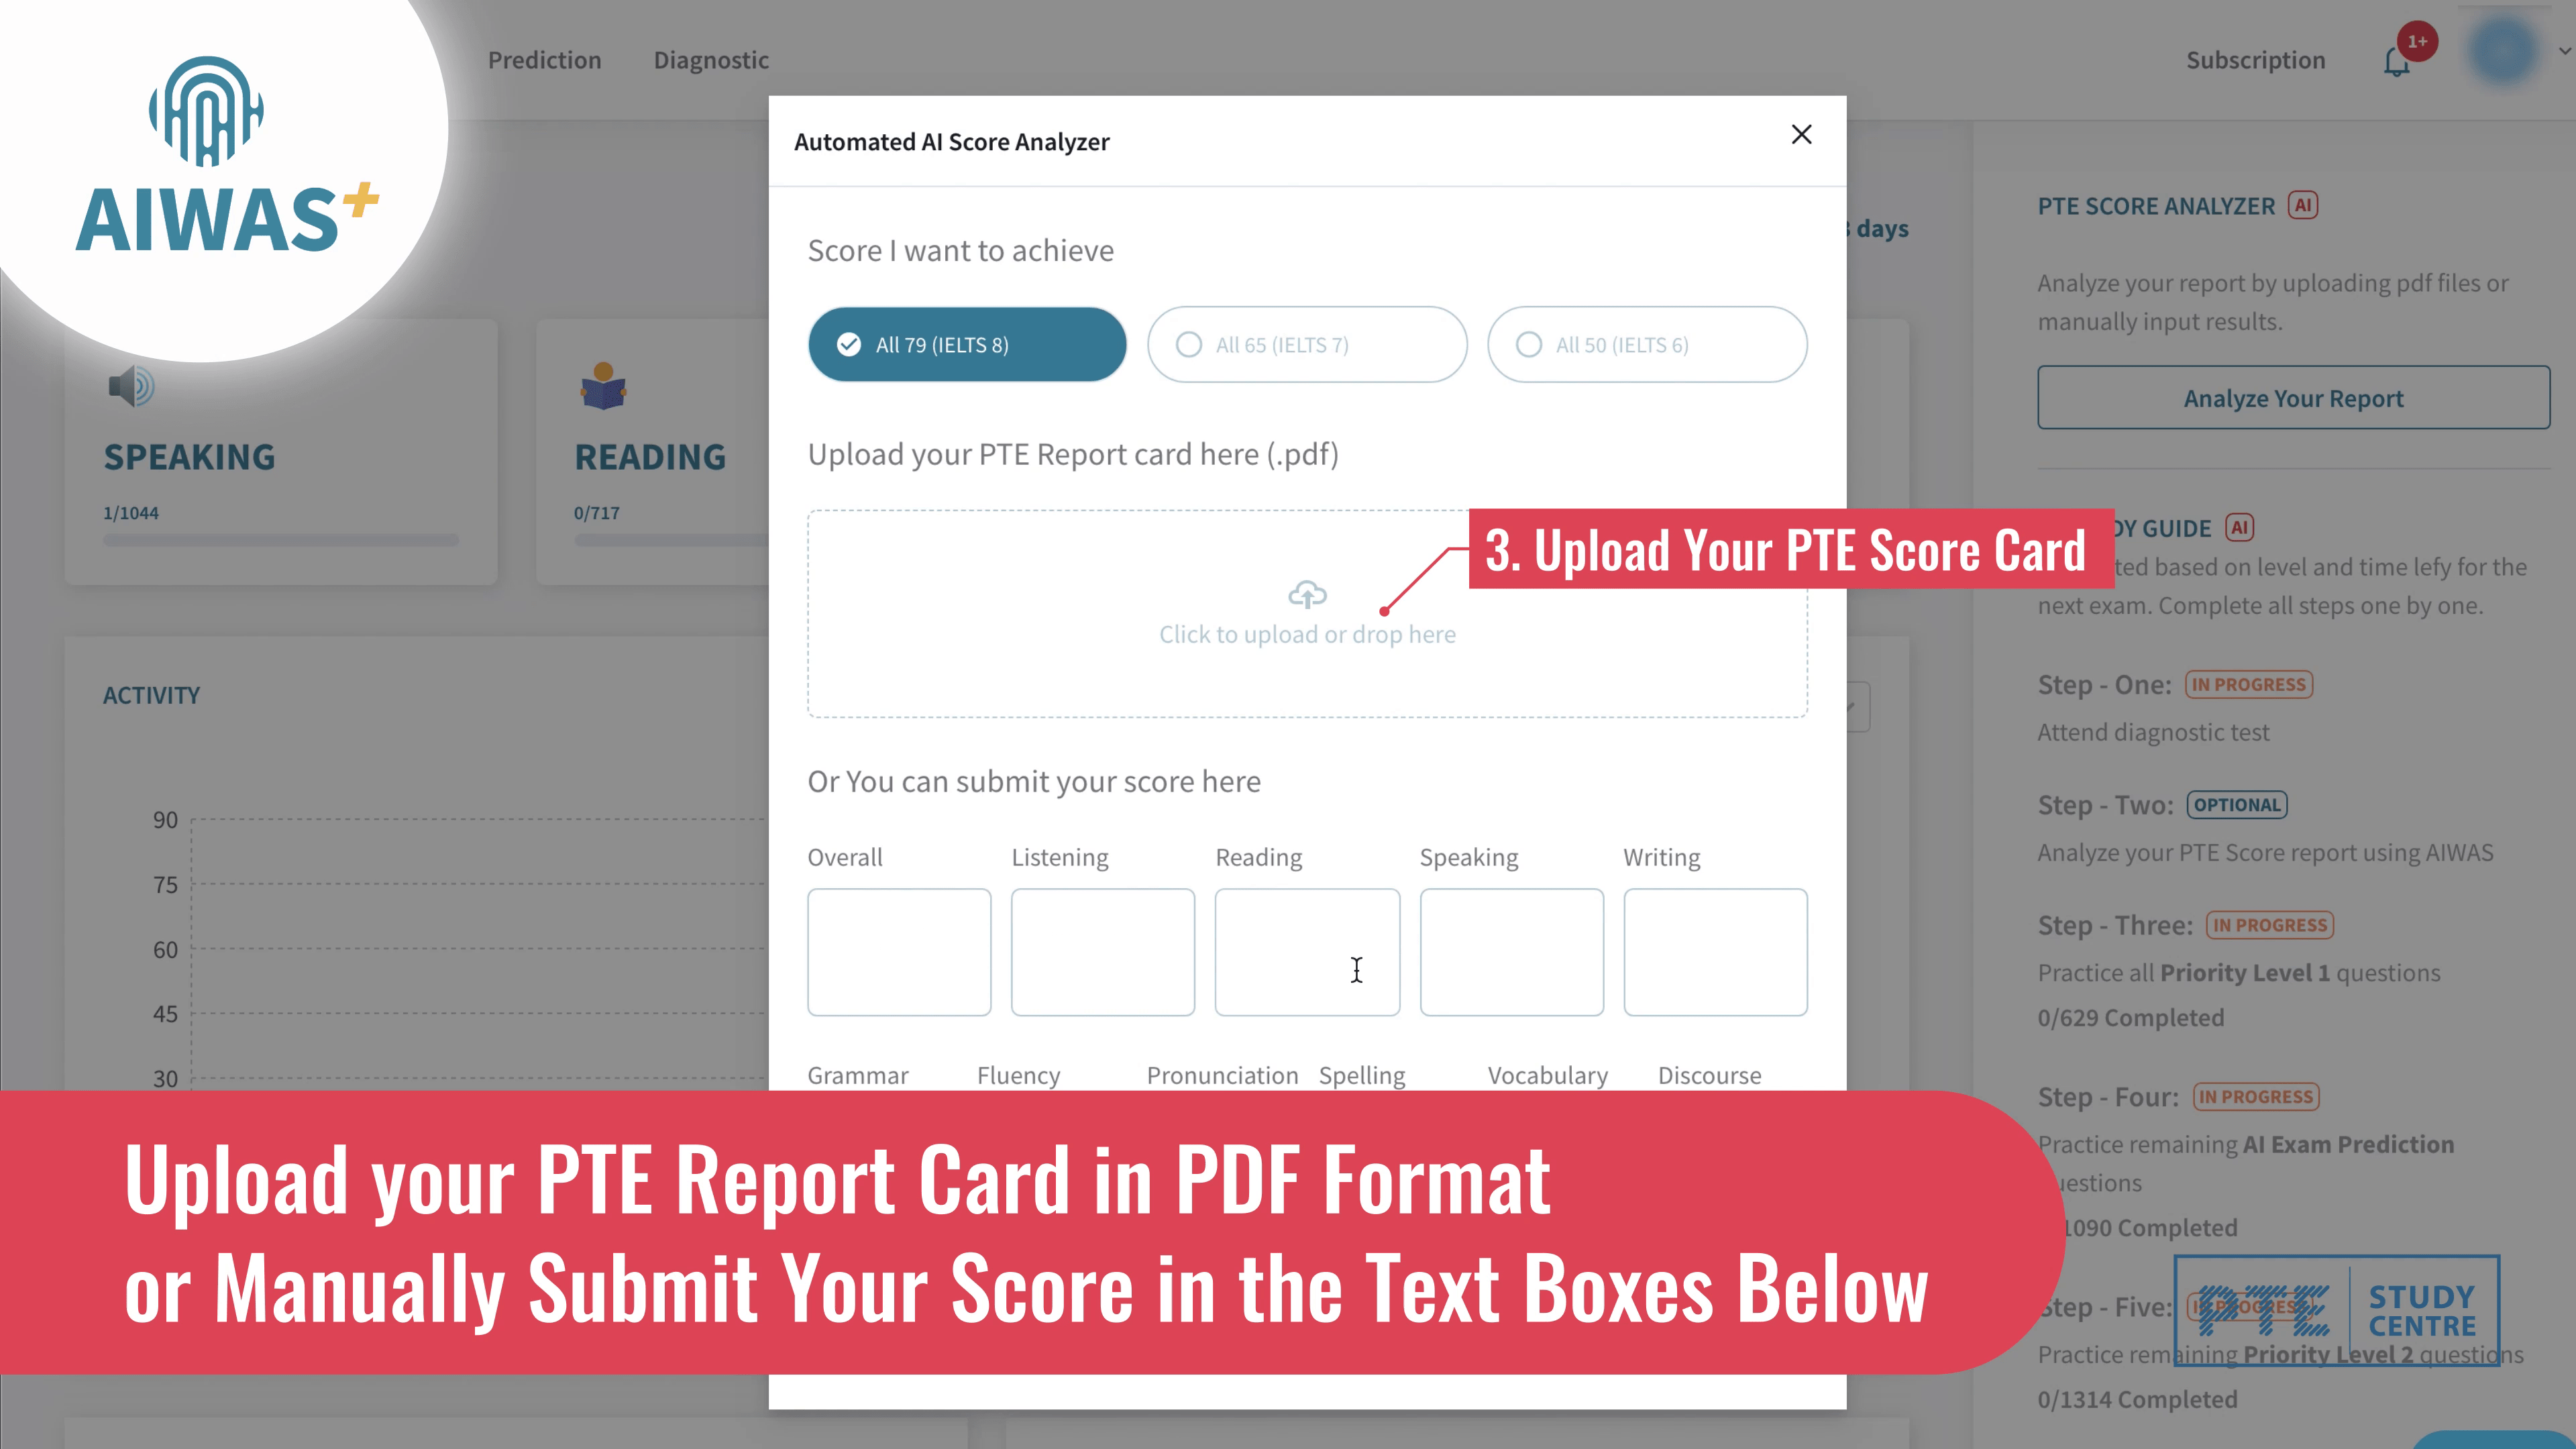 Upload your pte score card